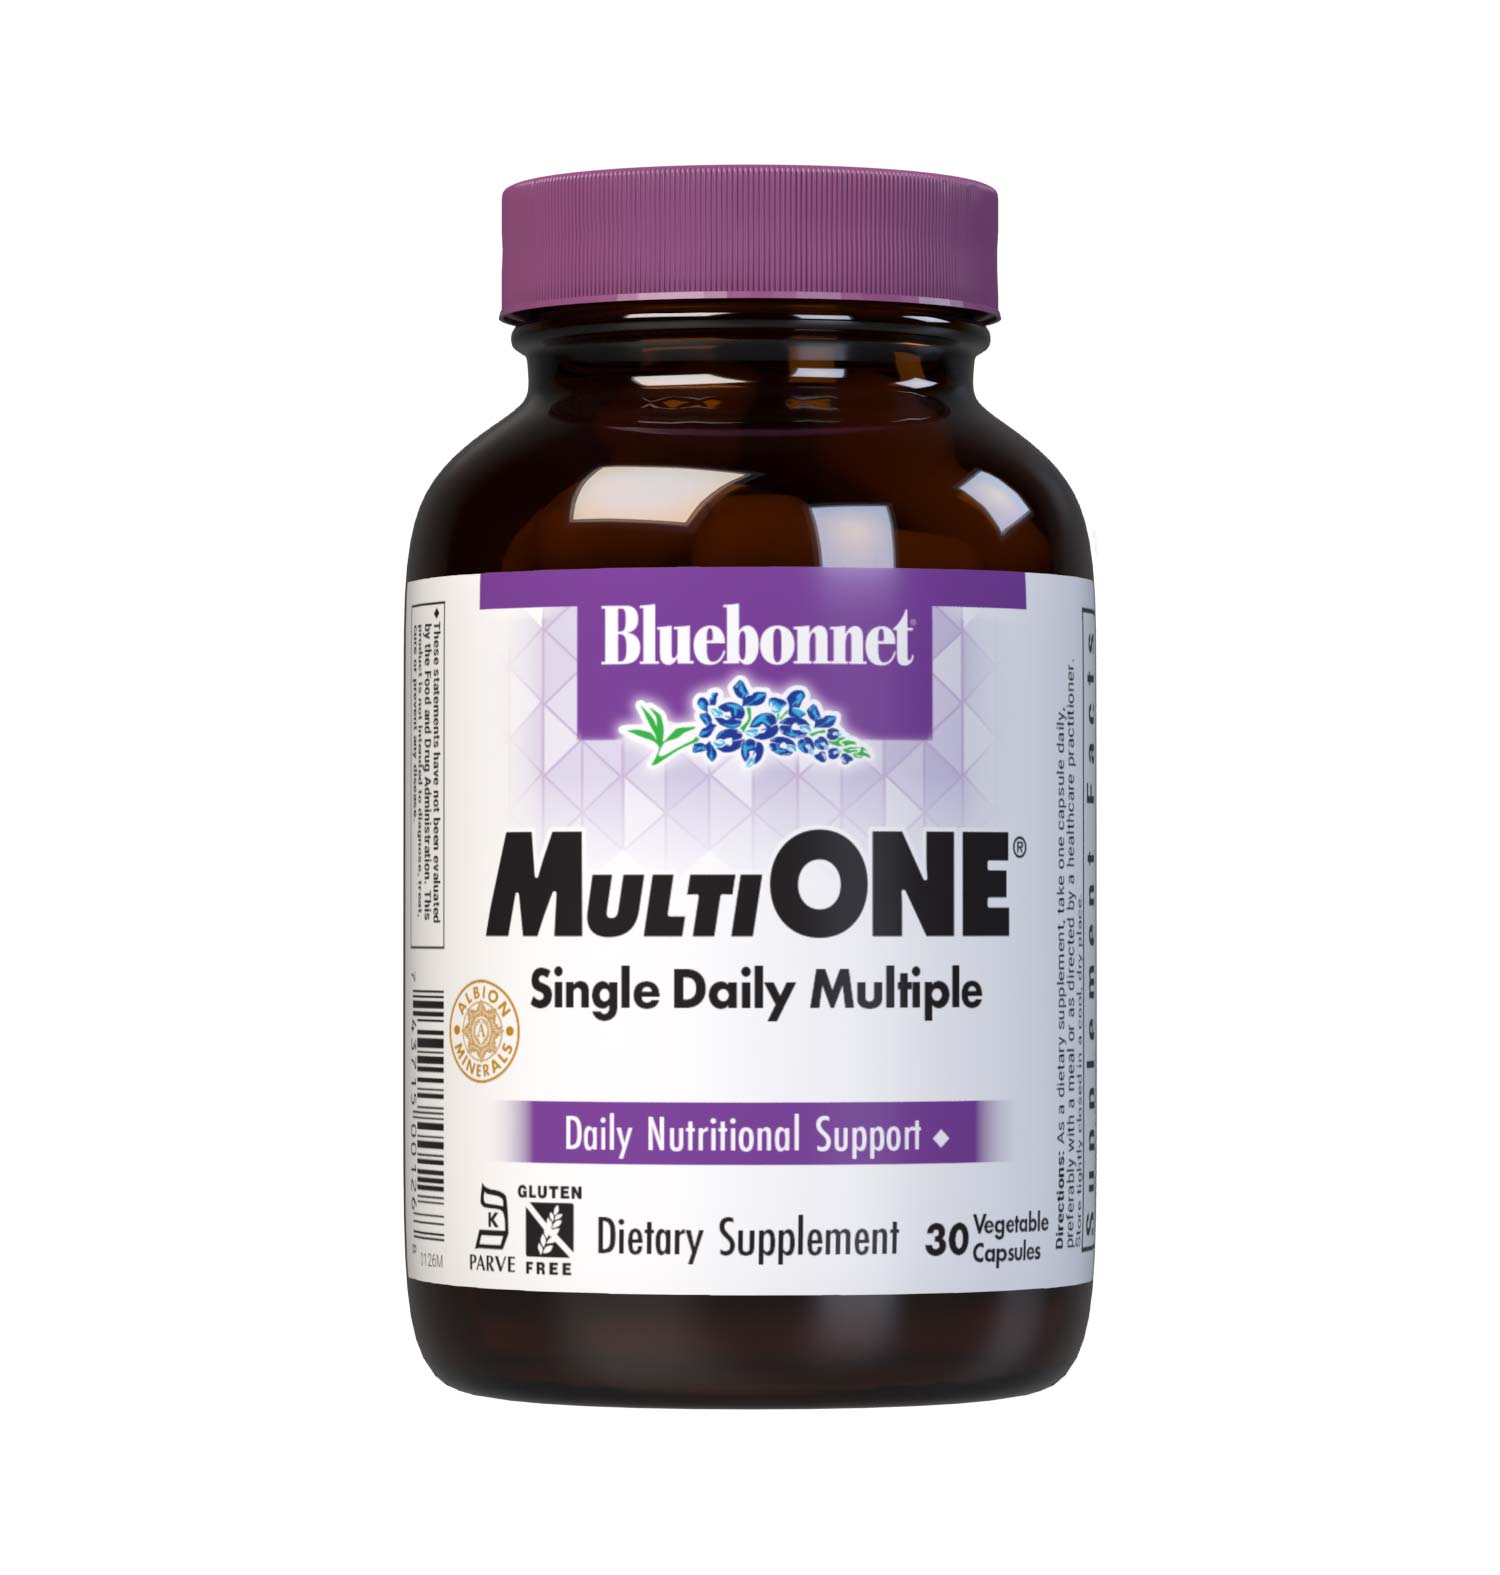 Bluebonnet’s Multi One Formula 30 Vegetable Capsules is a single daily multivitamin and multimineral dietary supplement in an easy-to-swallow, two-piece vegetable capsule and is formulated with highly efficient, patented Albion chelated minerals and popular carotenoids, such as beta carotene and FloraGLO lutein from marigold extract. #size_30 count